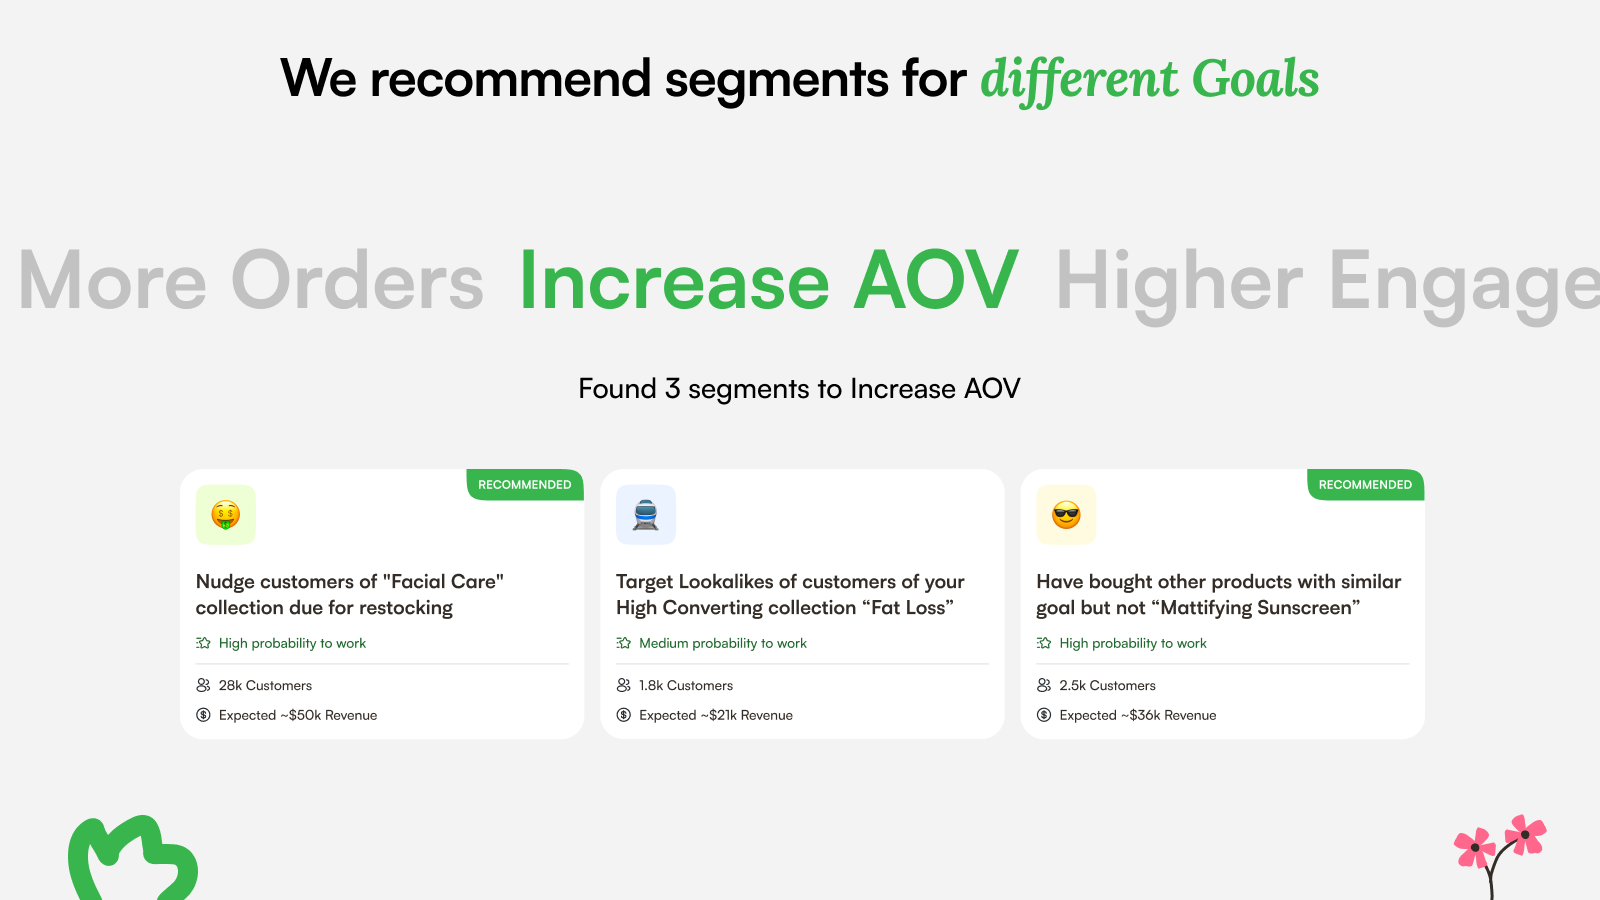 Goal-wise Segment Recommendations